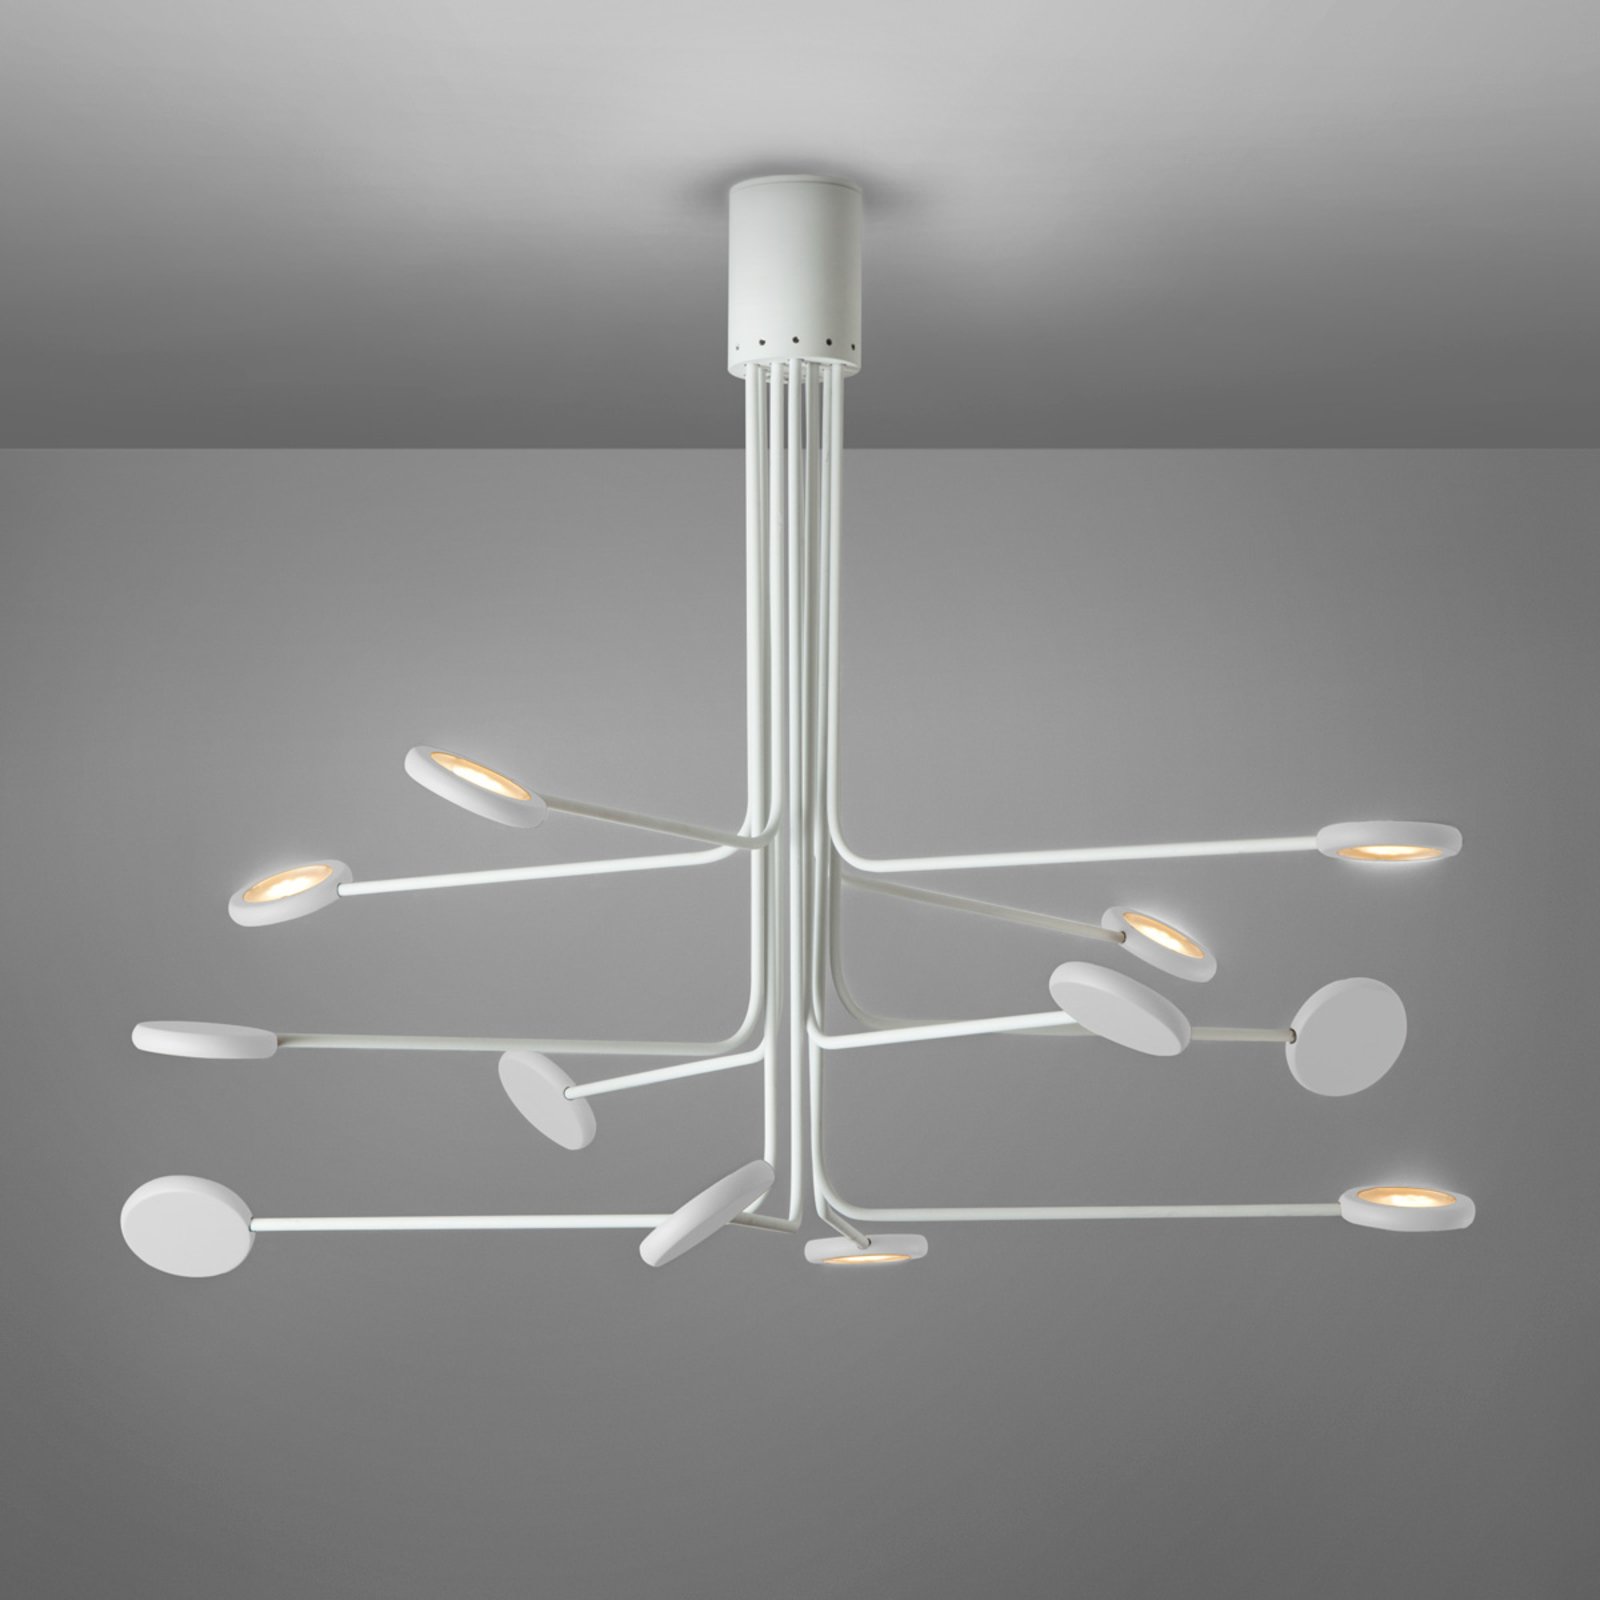 Arbor - LED ceiling light with a delicate design